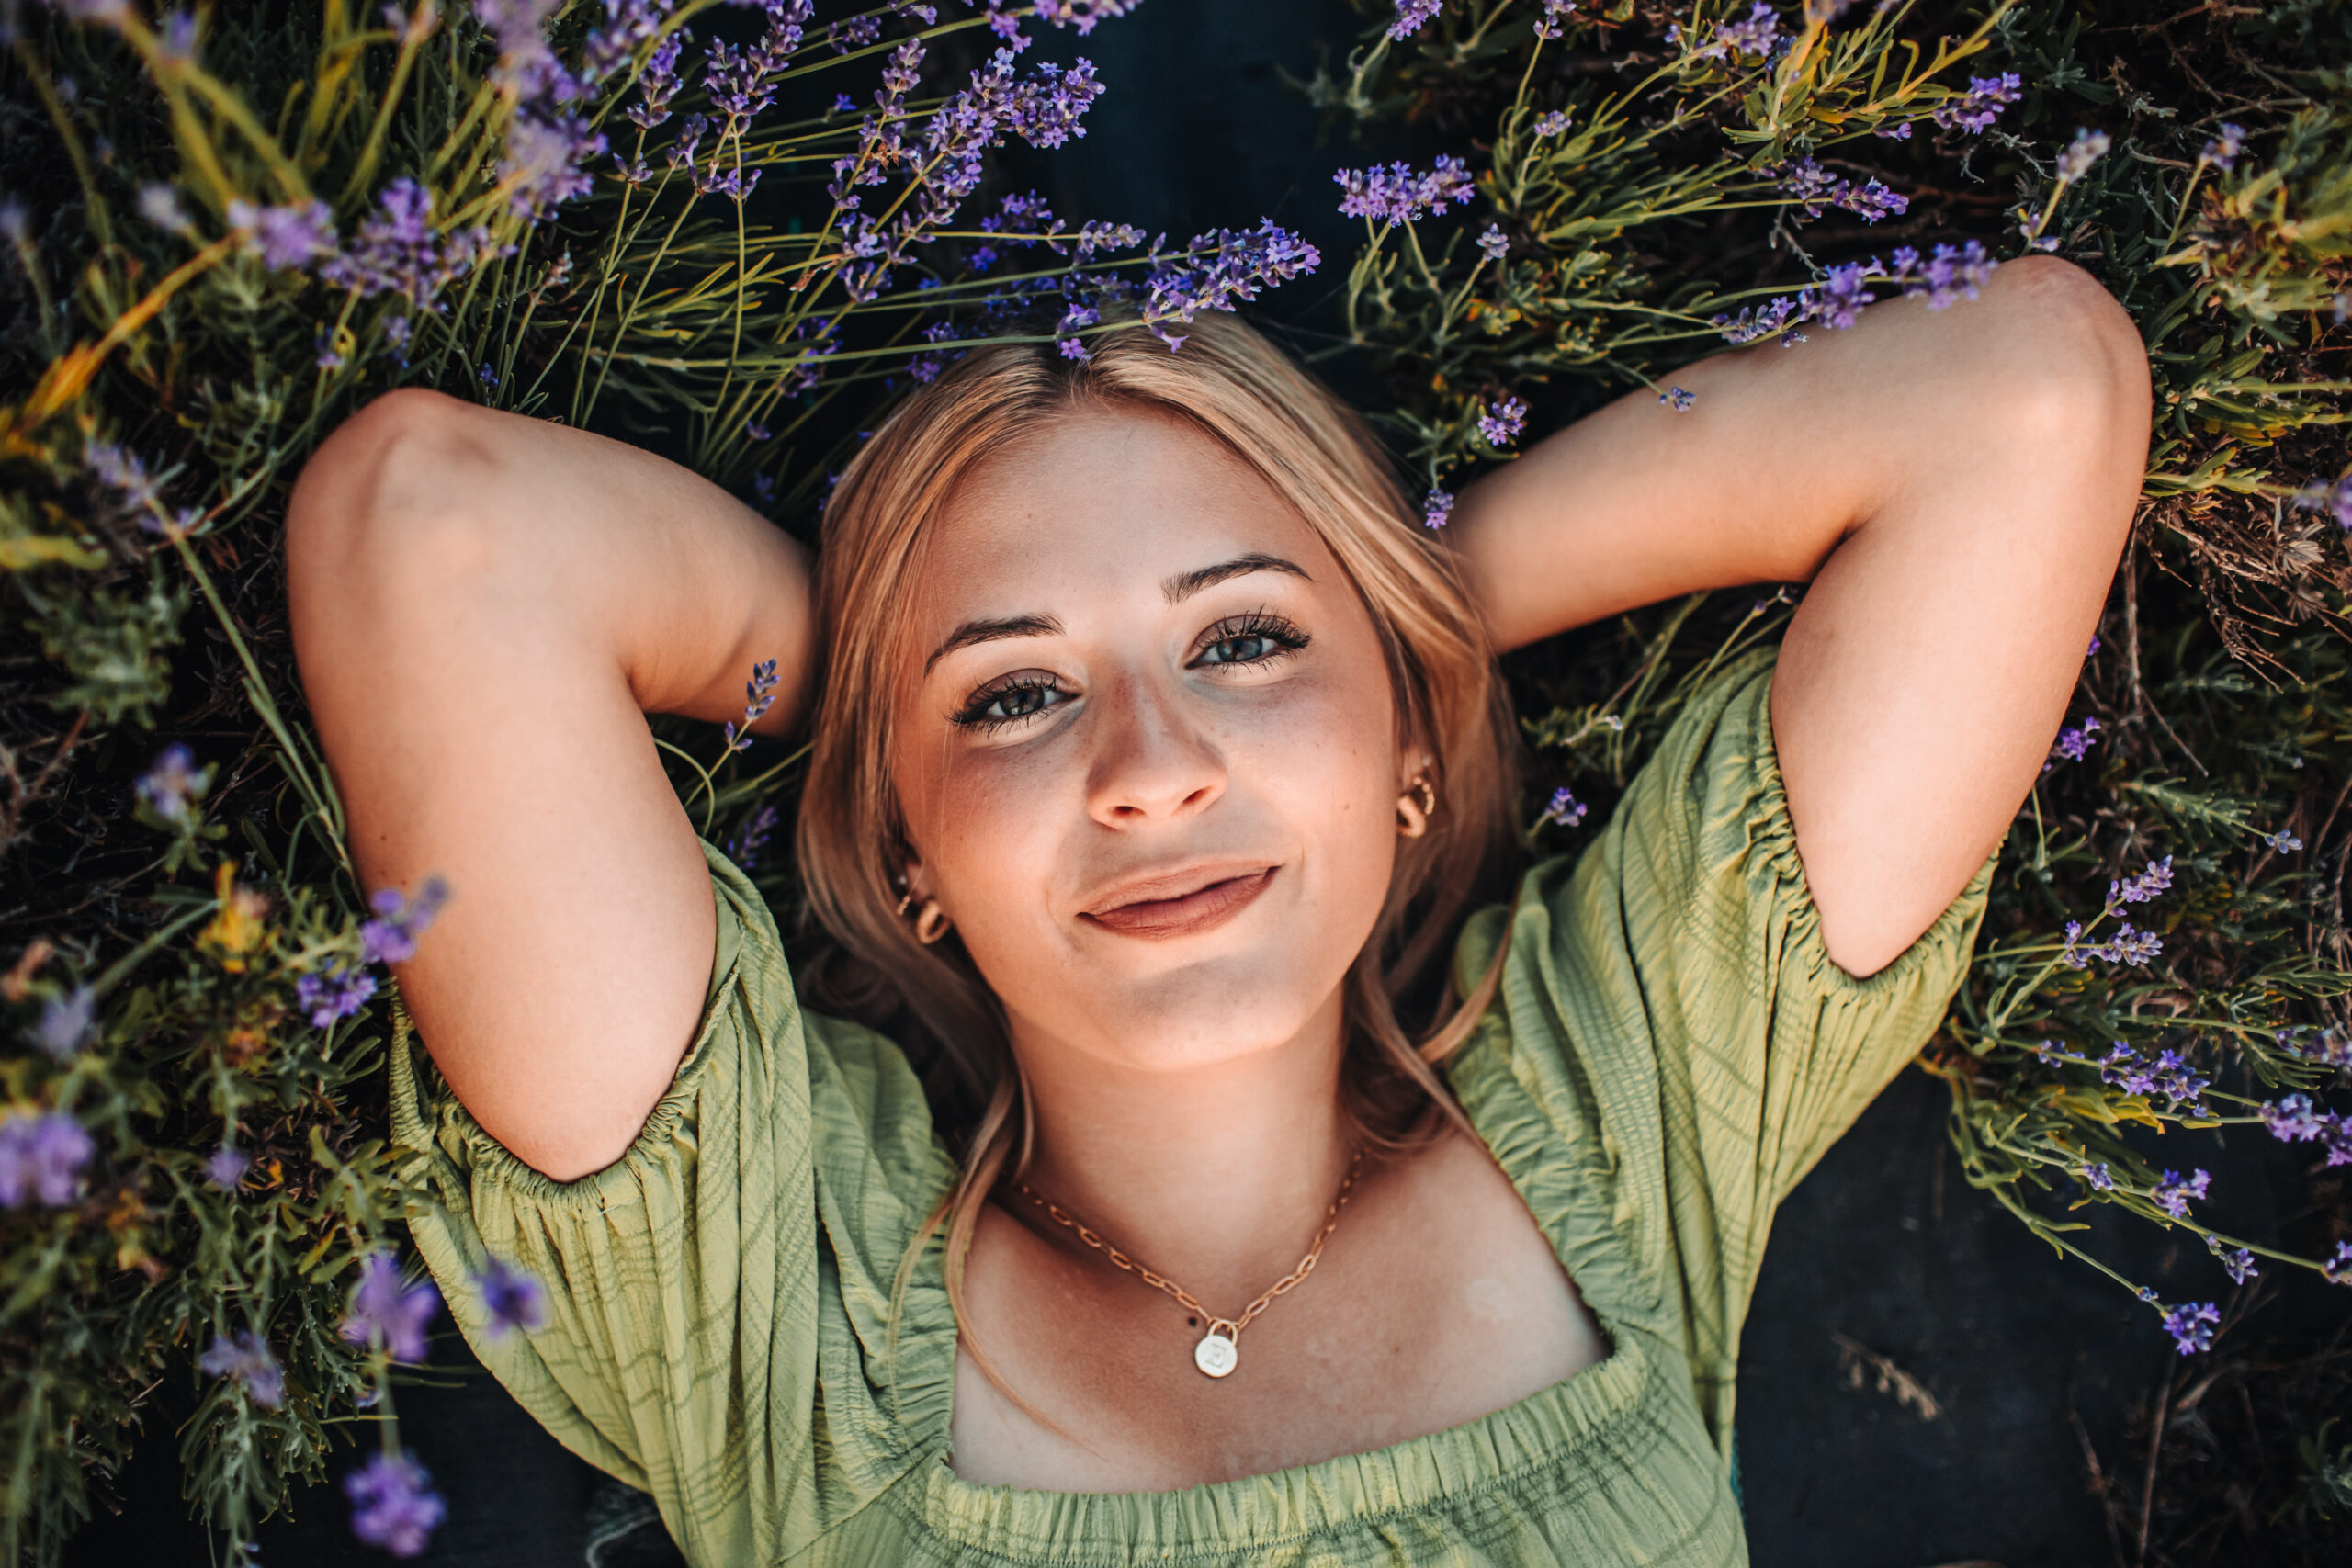 Wisconsin high school senior laying in a lavender field